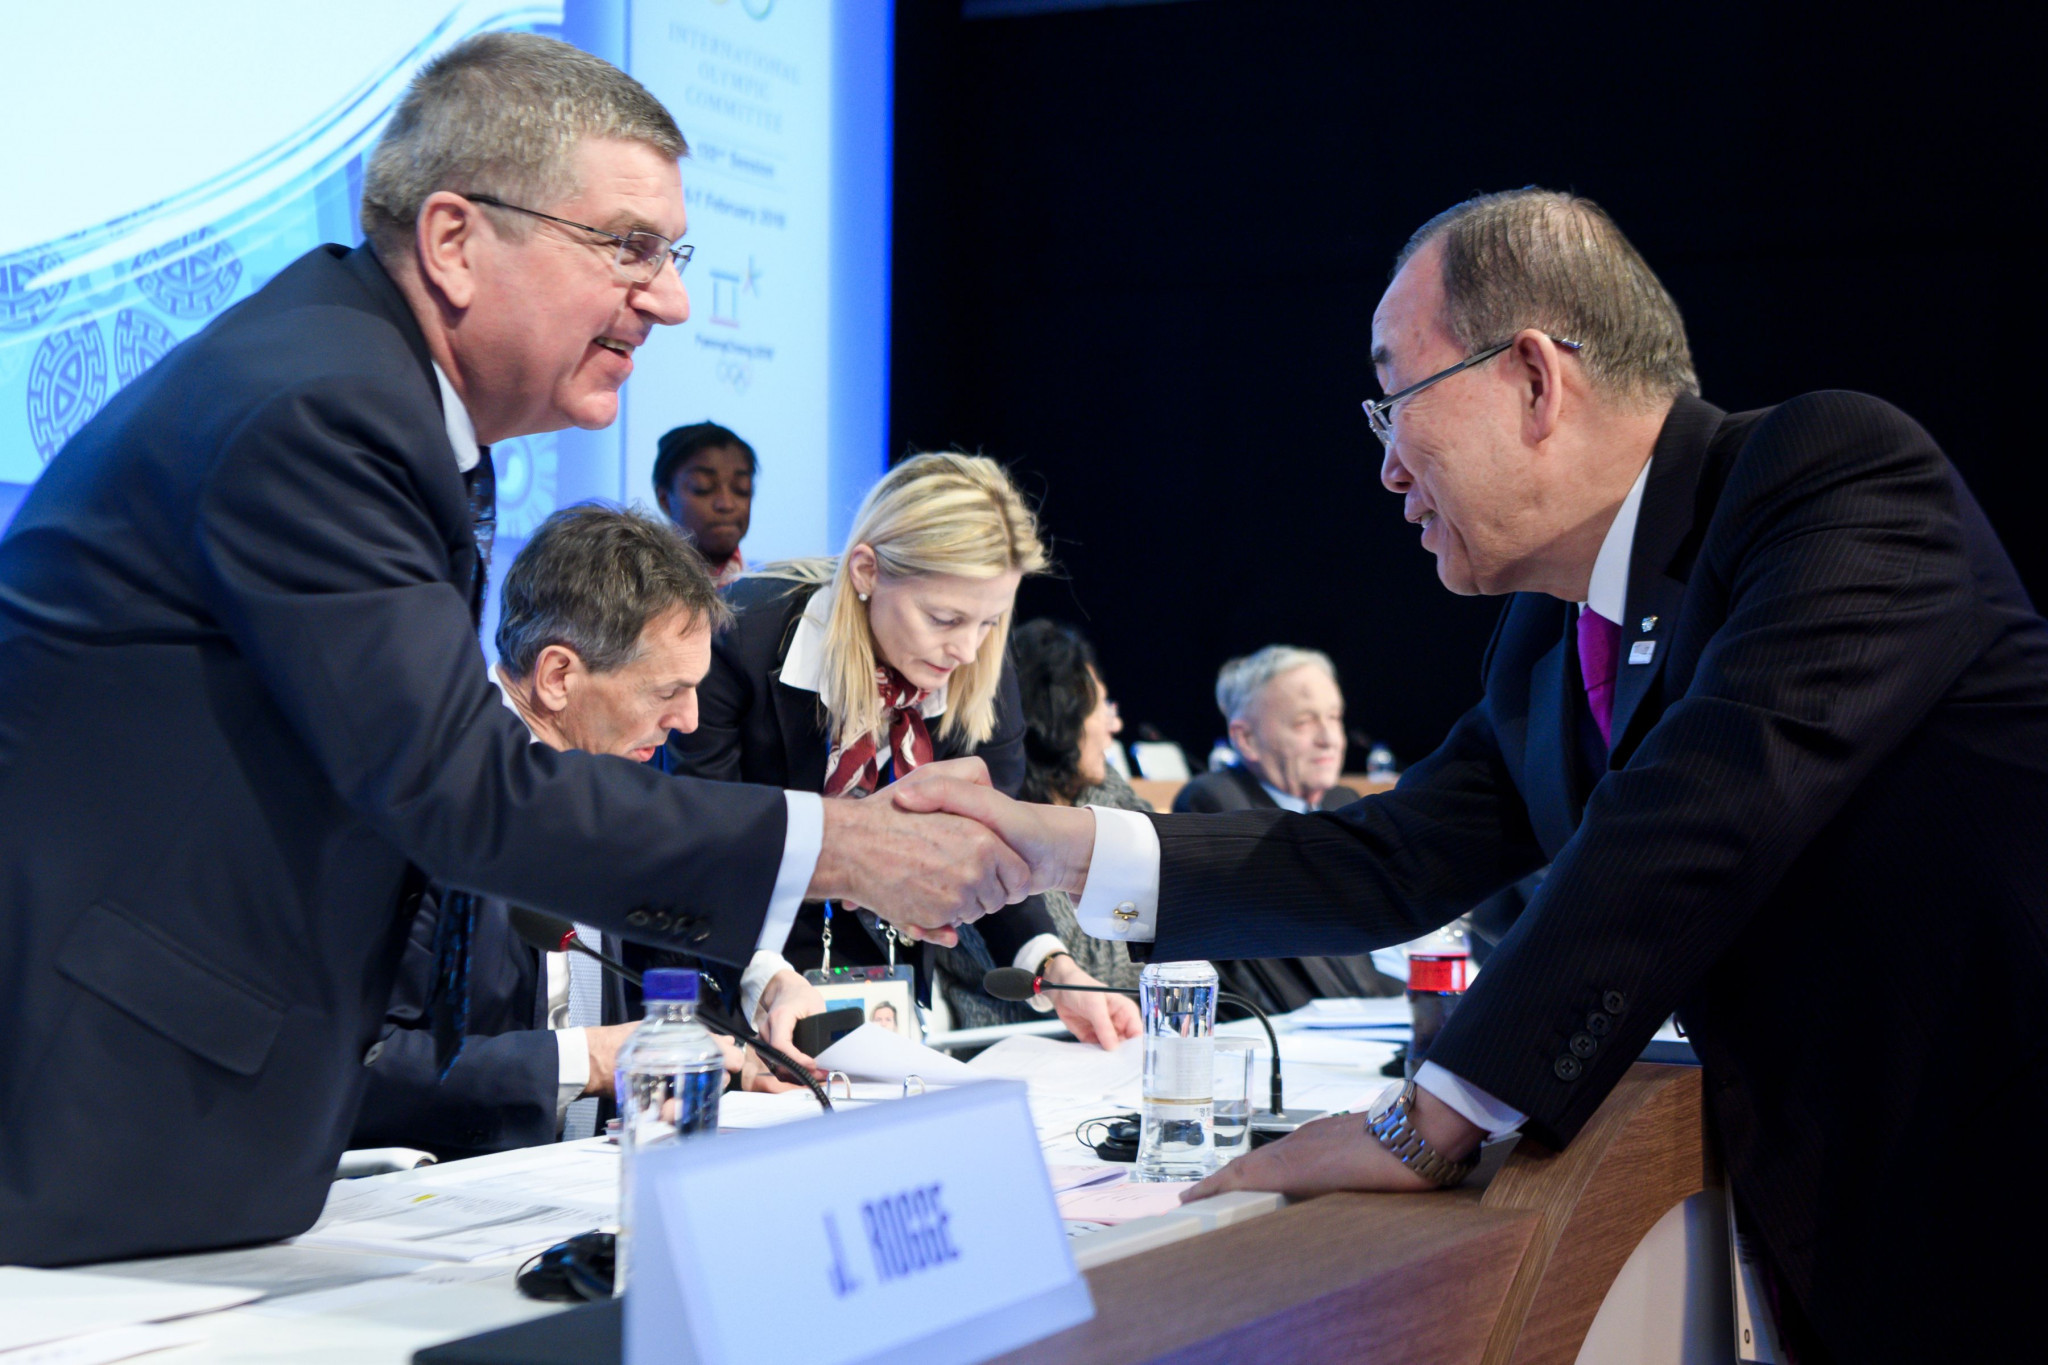 Former UN secretary general Ban Ki-moon, right, chairs the IOC Ethics Commission, but it has not communicated a decision since February 2021 ©Getty Images